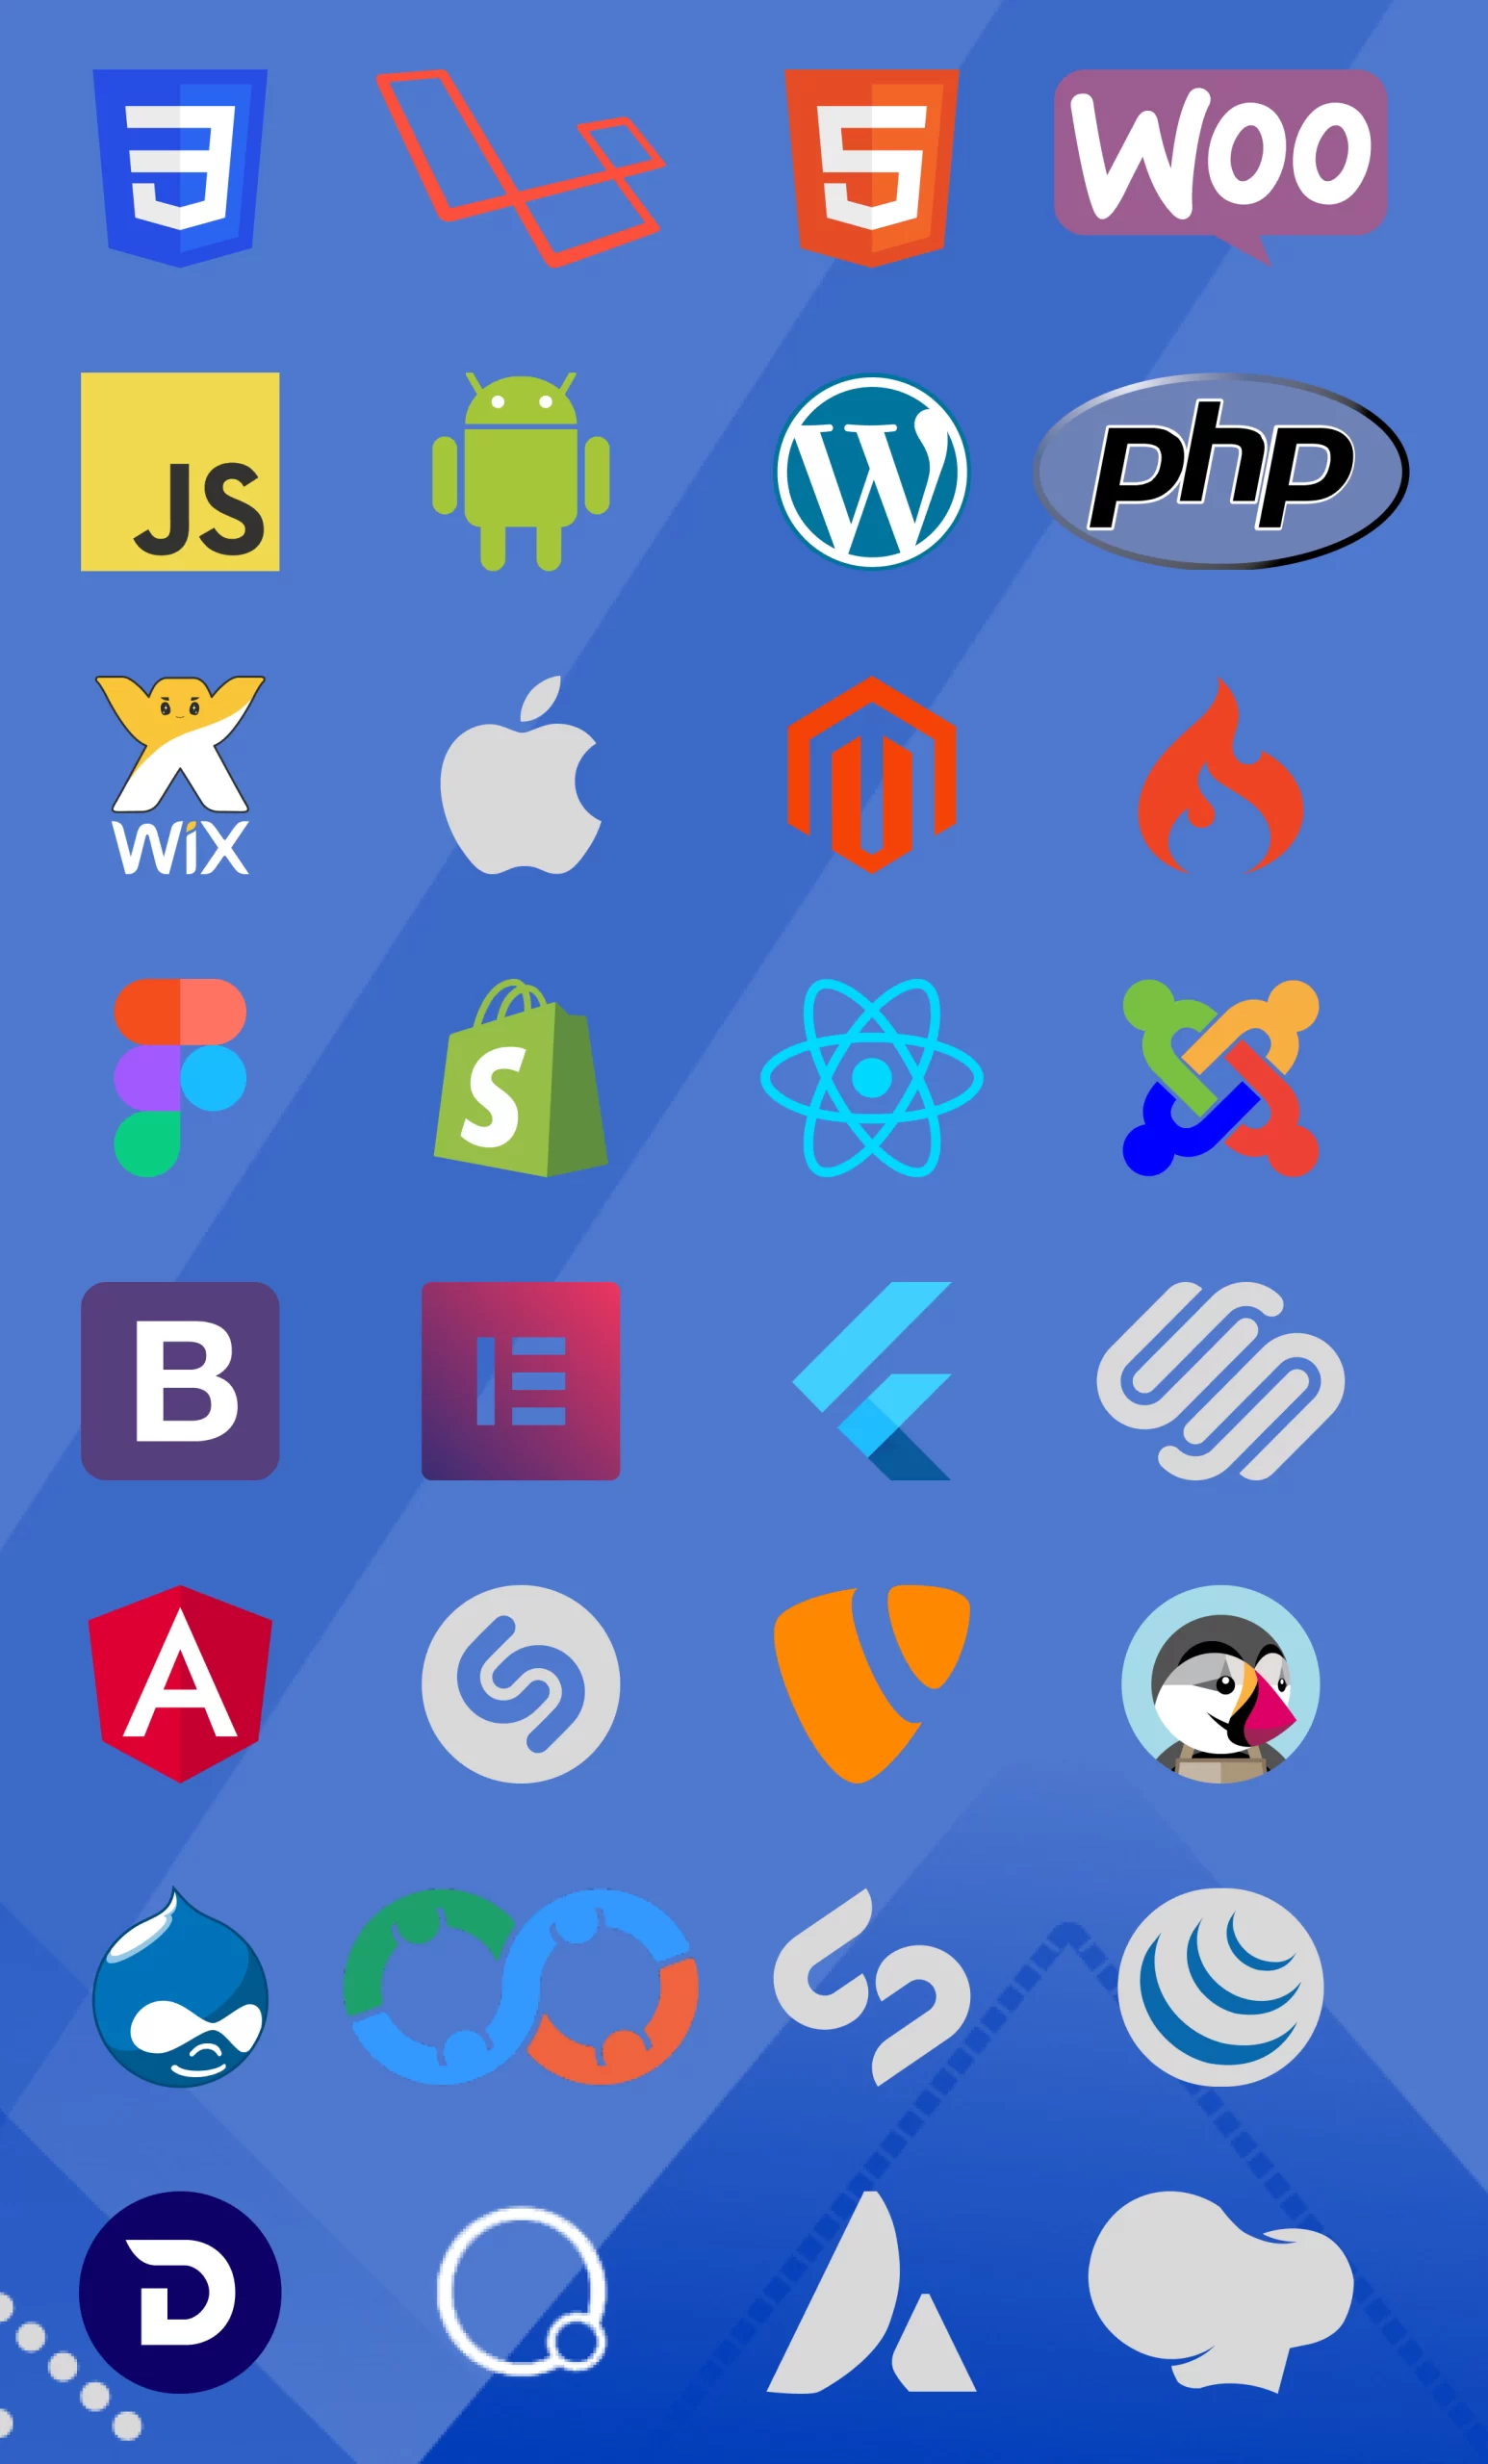 programming languages, CMS, themes, plugins, website builders, or platforms for creating mobile applications. The keywords "HTML logos," "CSS logos," "Python logos," "WordPress logos," "Elementor logos," or "React Native logos," for instance, can be used.